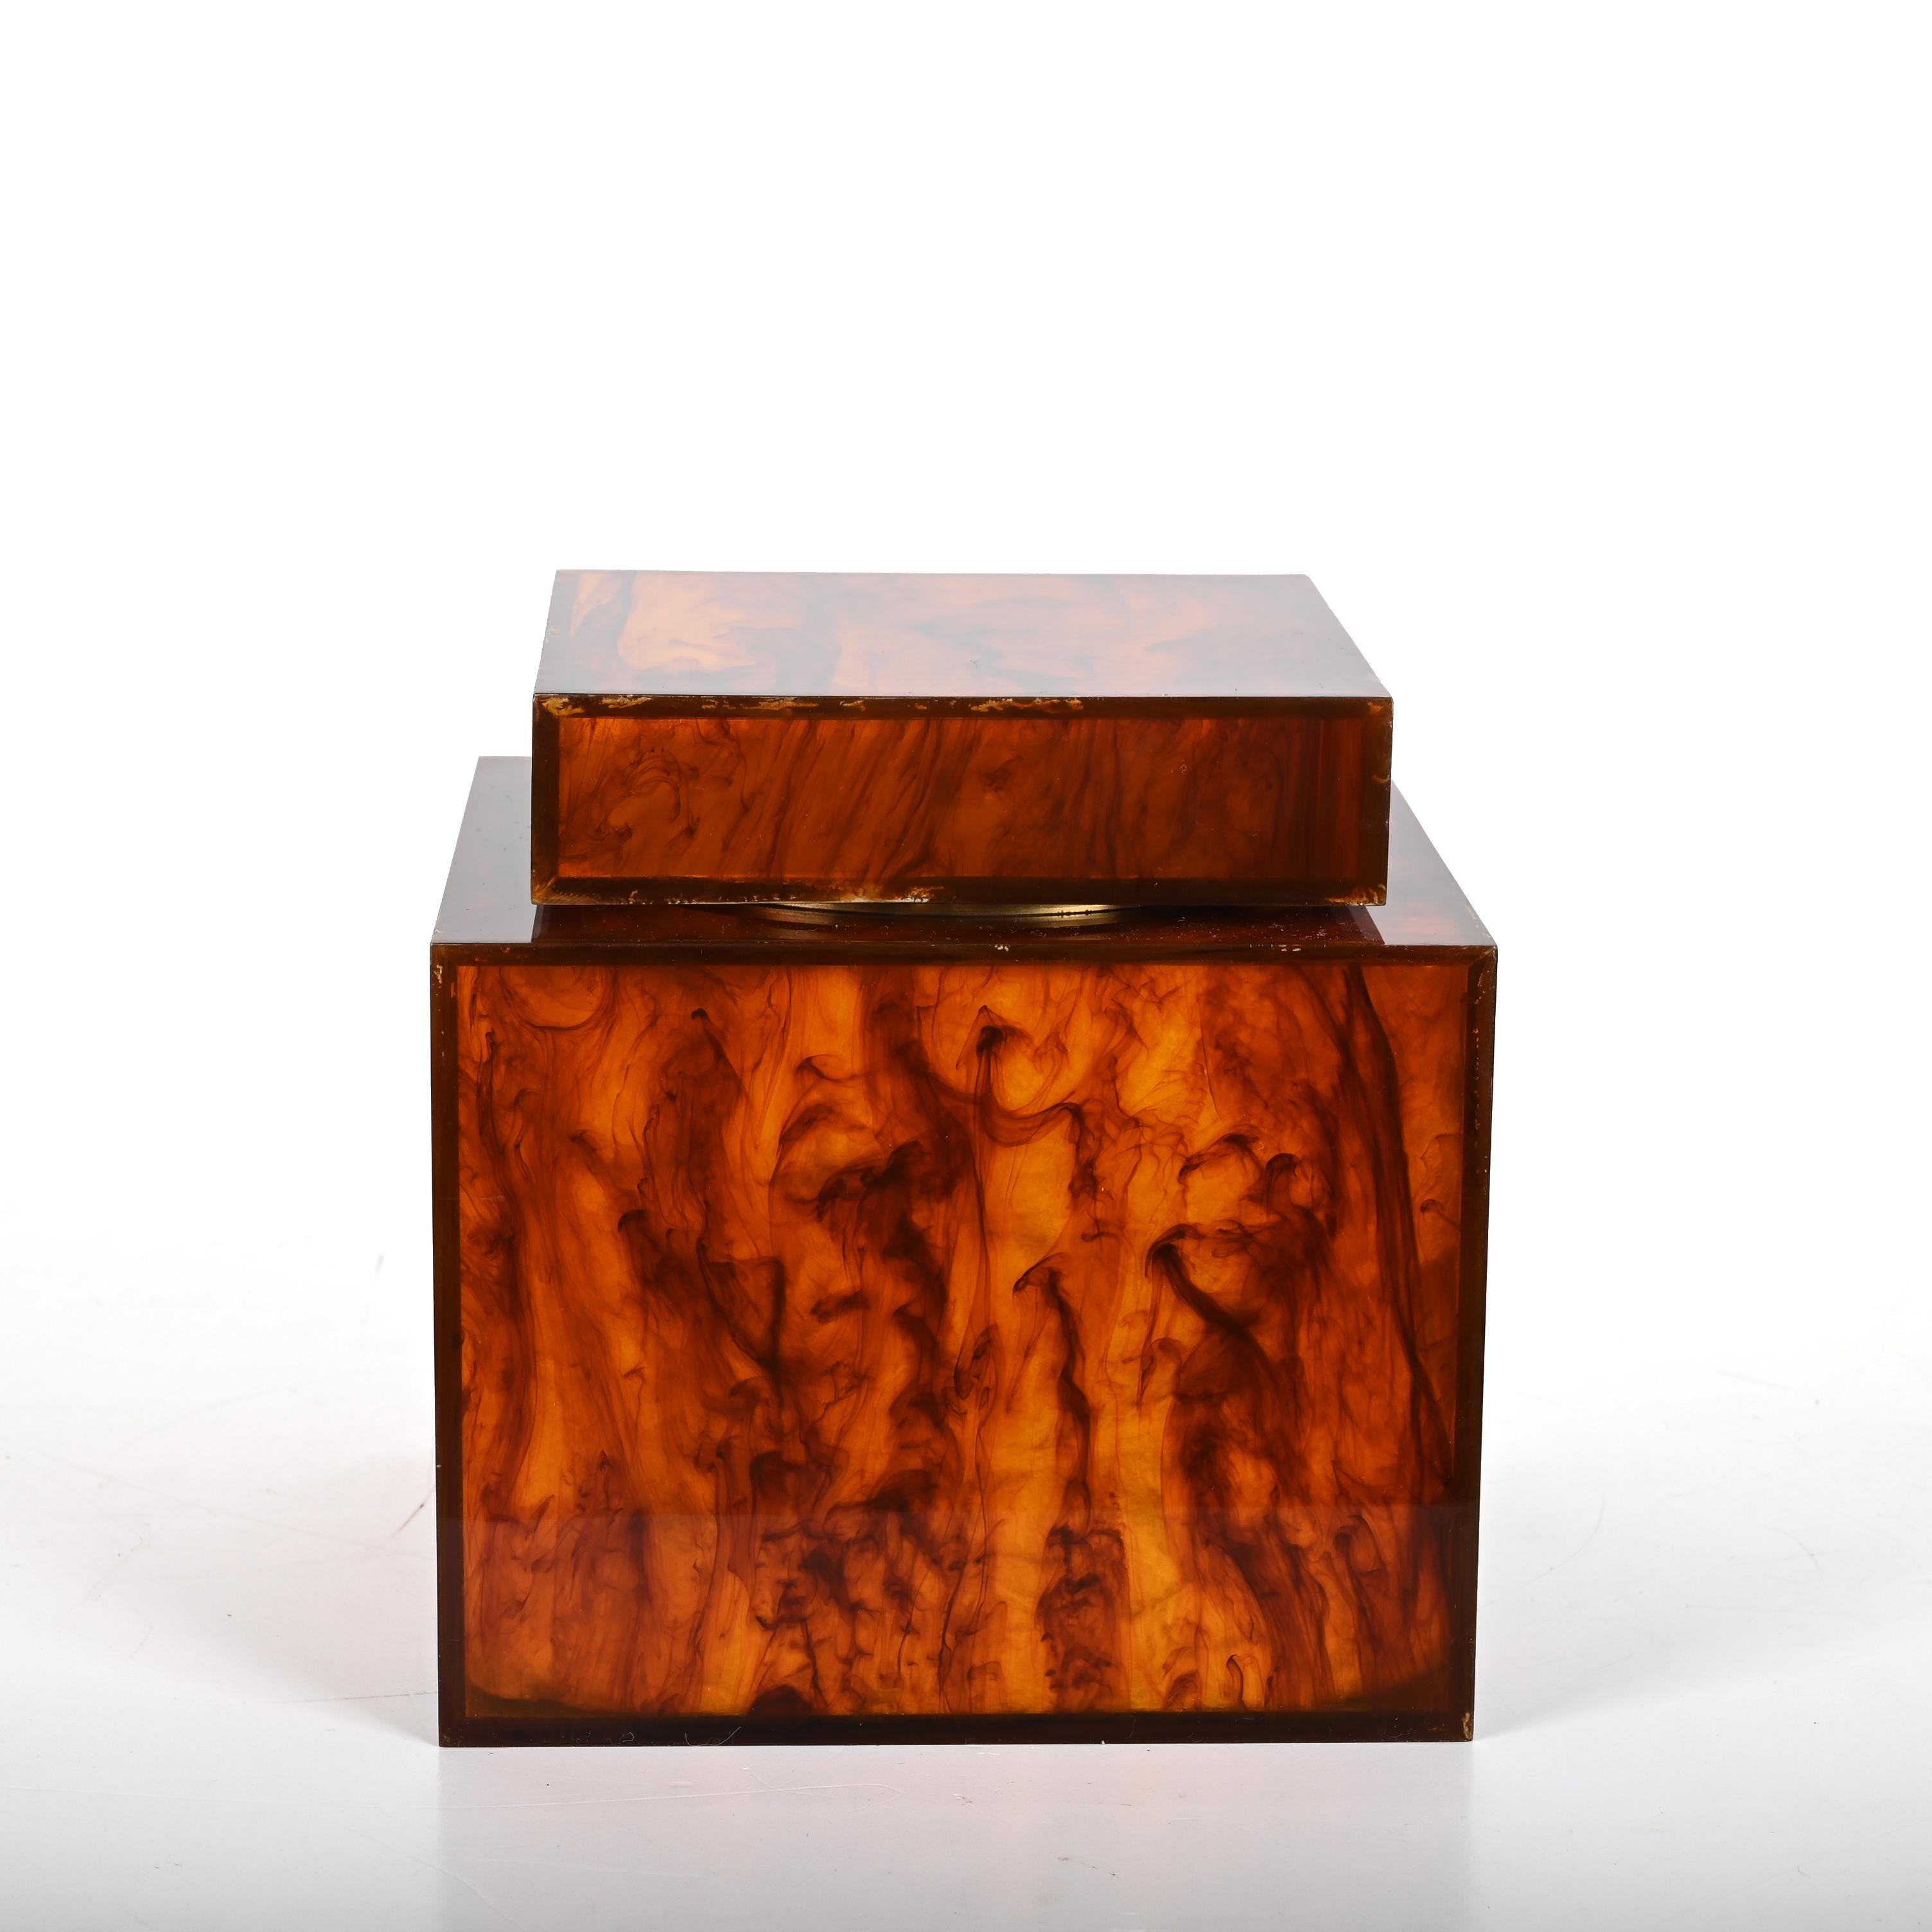 Midcentury Italian Square Lucite Ice Bucket with Tortoise Shell Effect, 1970s For Sale 4